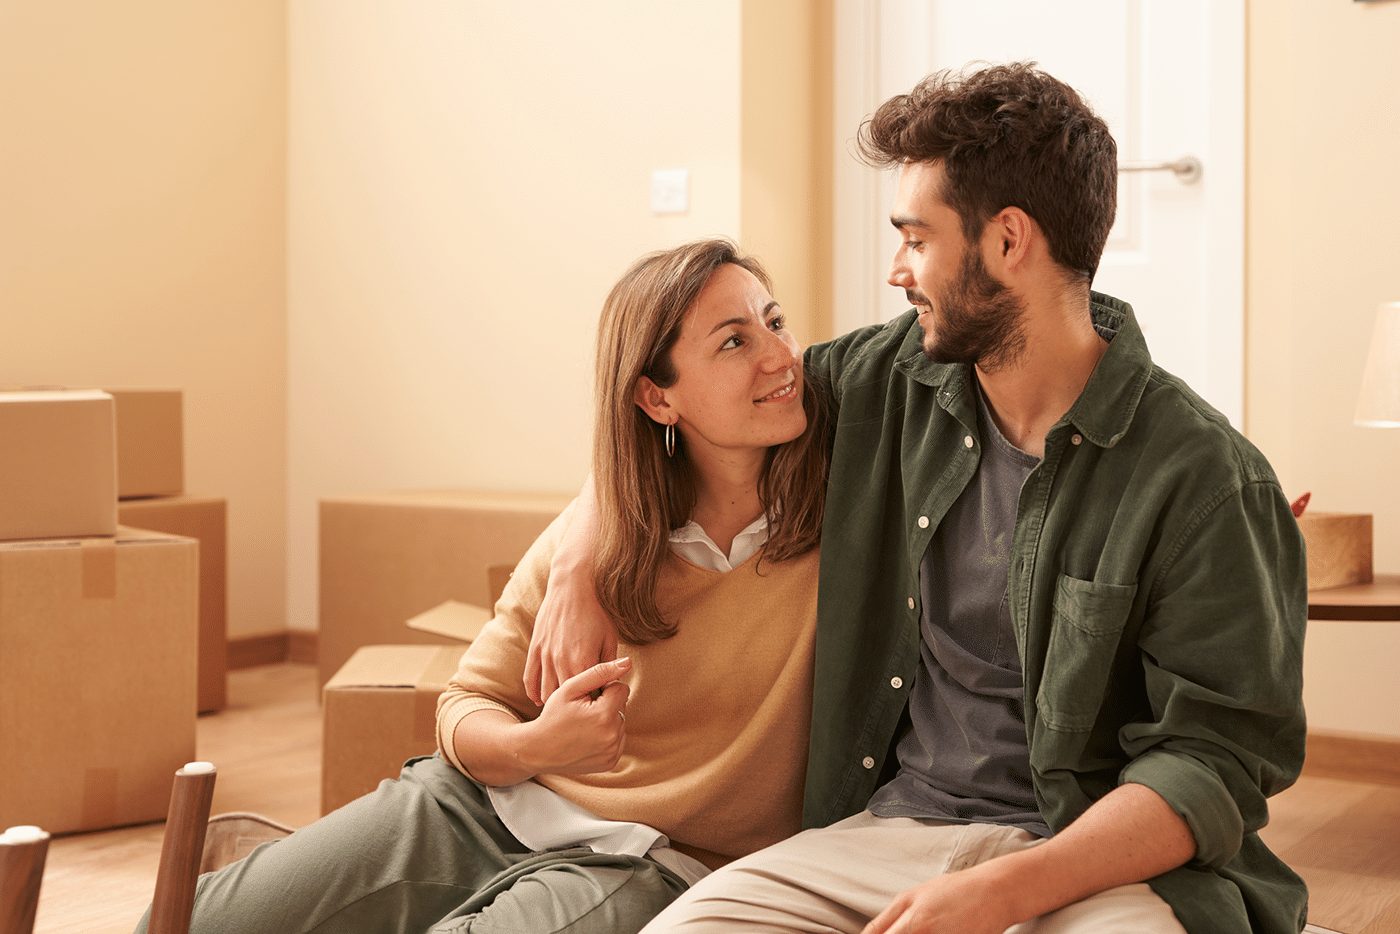 Young man hugging and looking at girlfriend sitting on floor near cardboard boxes in new apartment